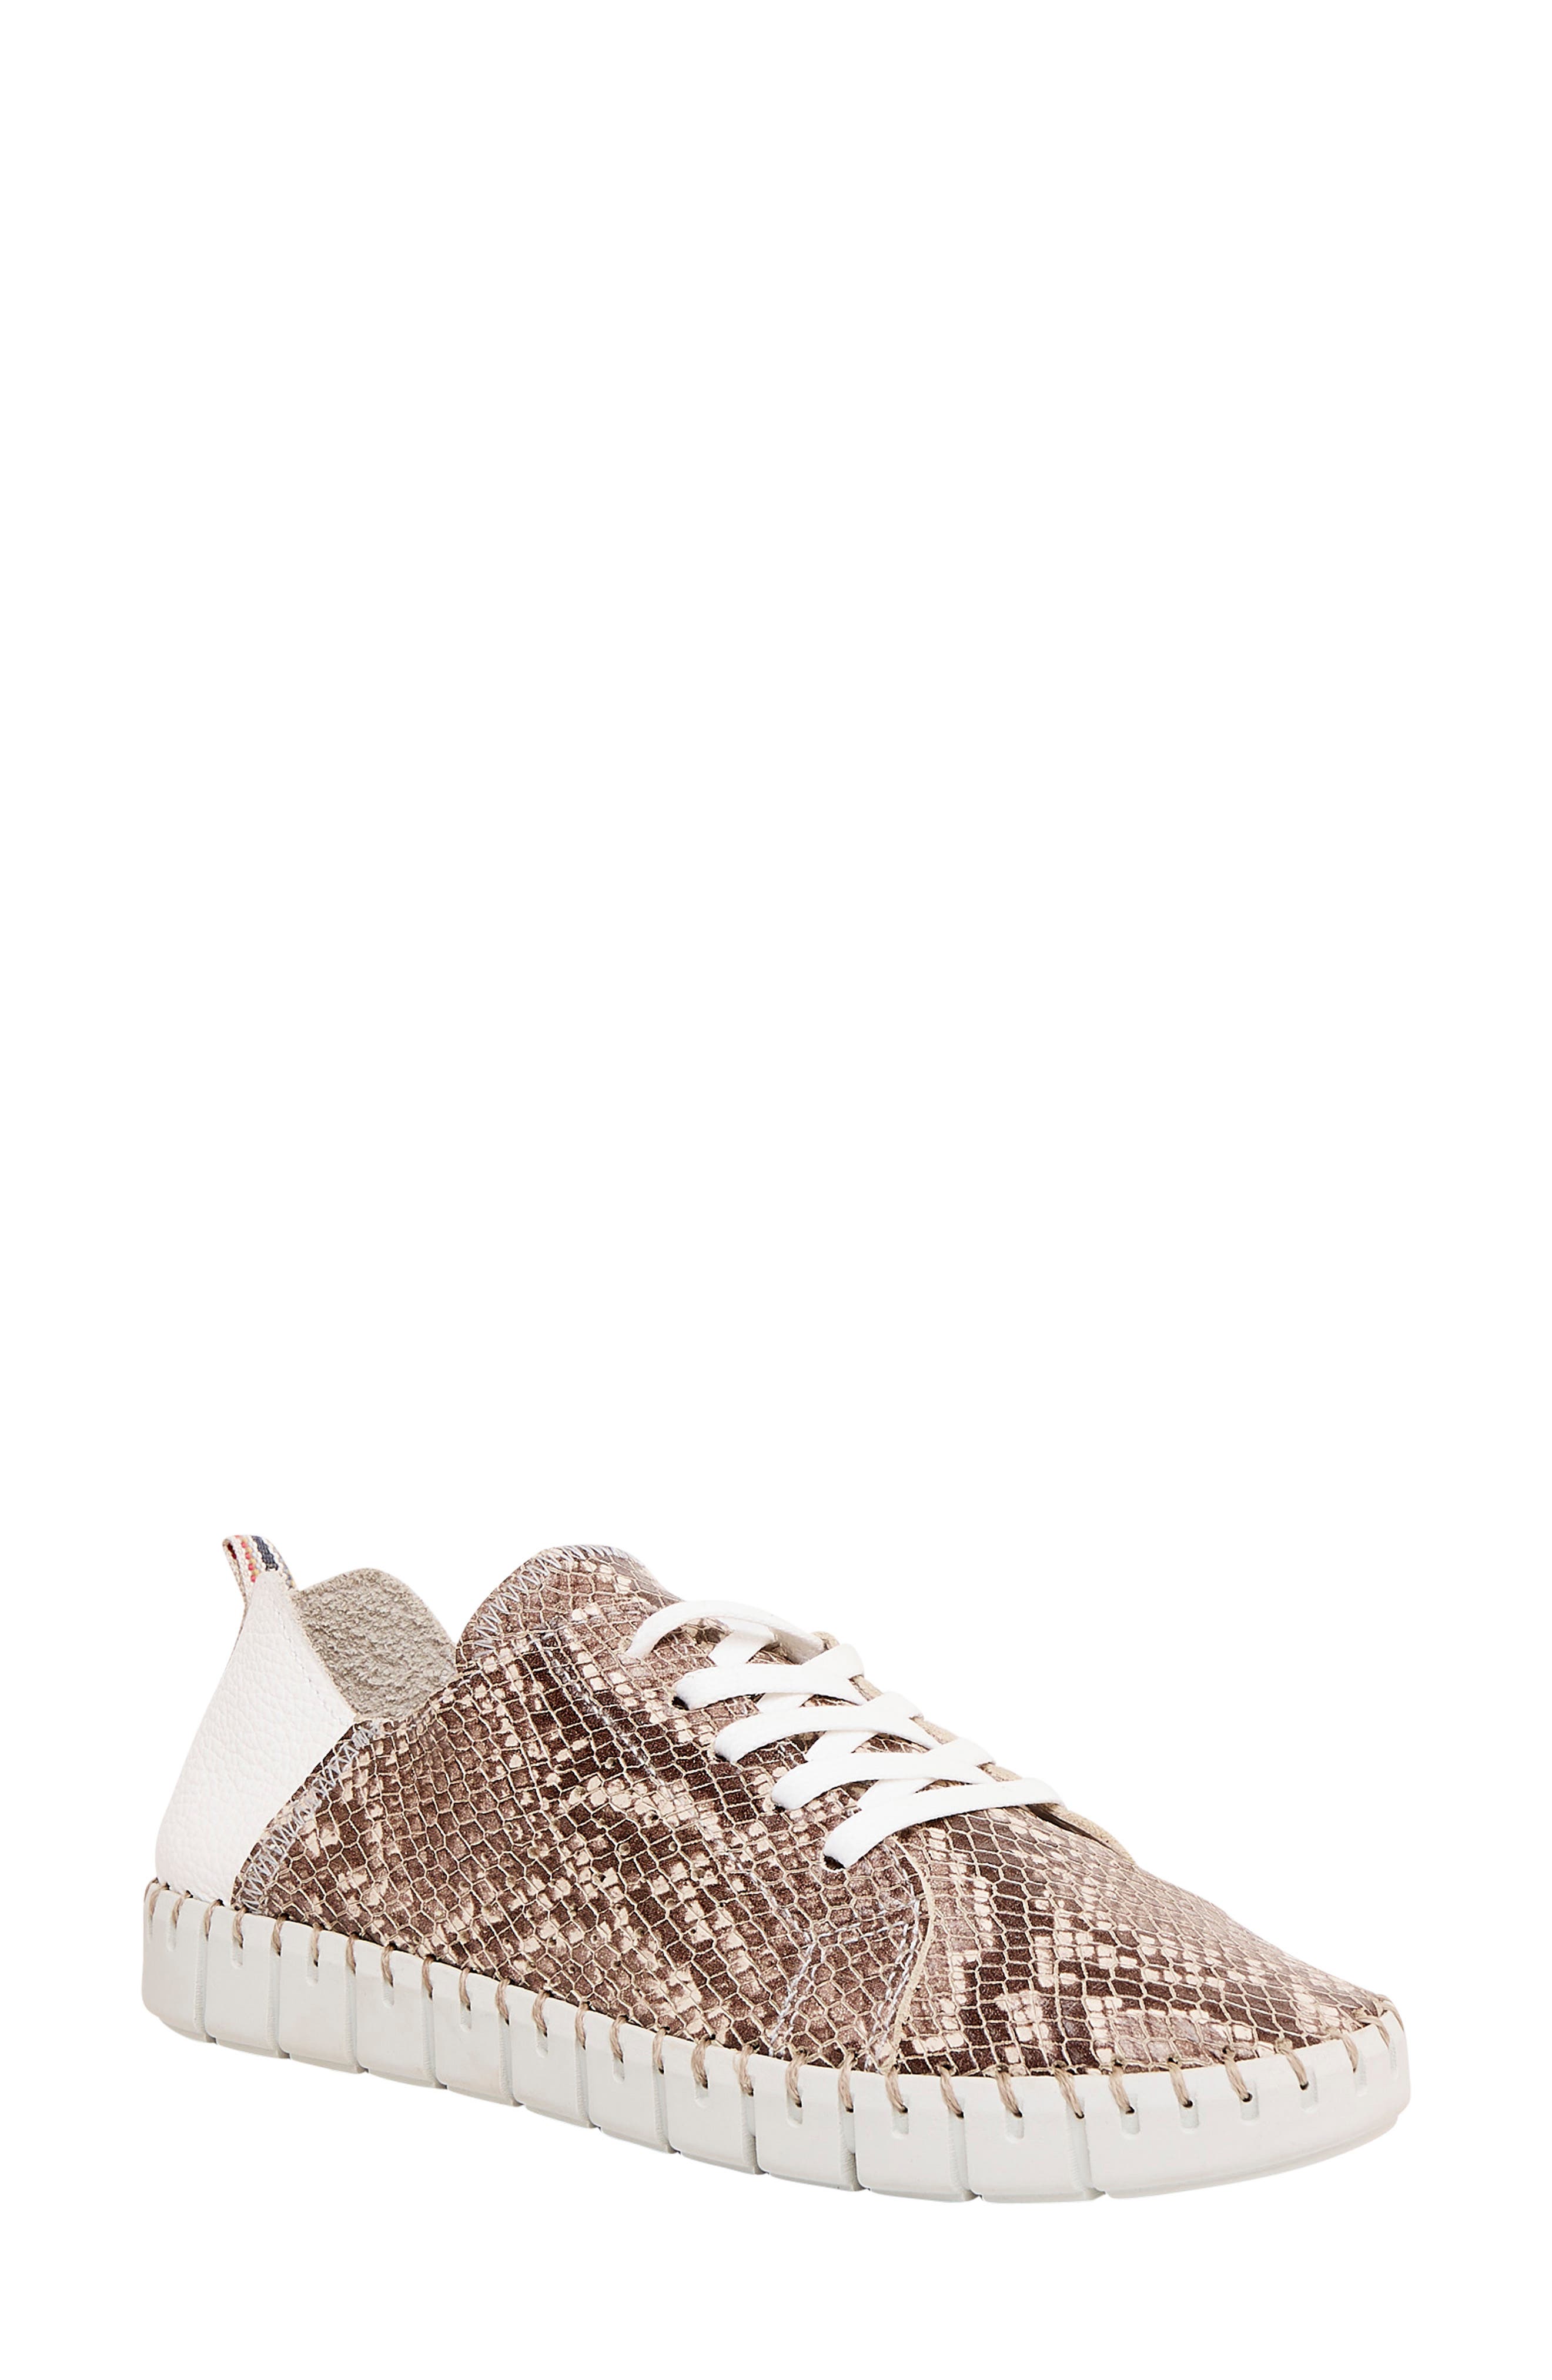 Andre Assous Womens Shawn Fashion Sneaker 